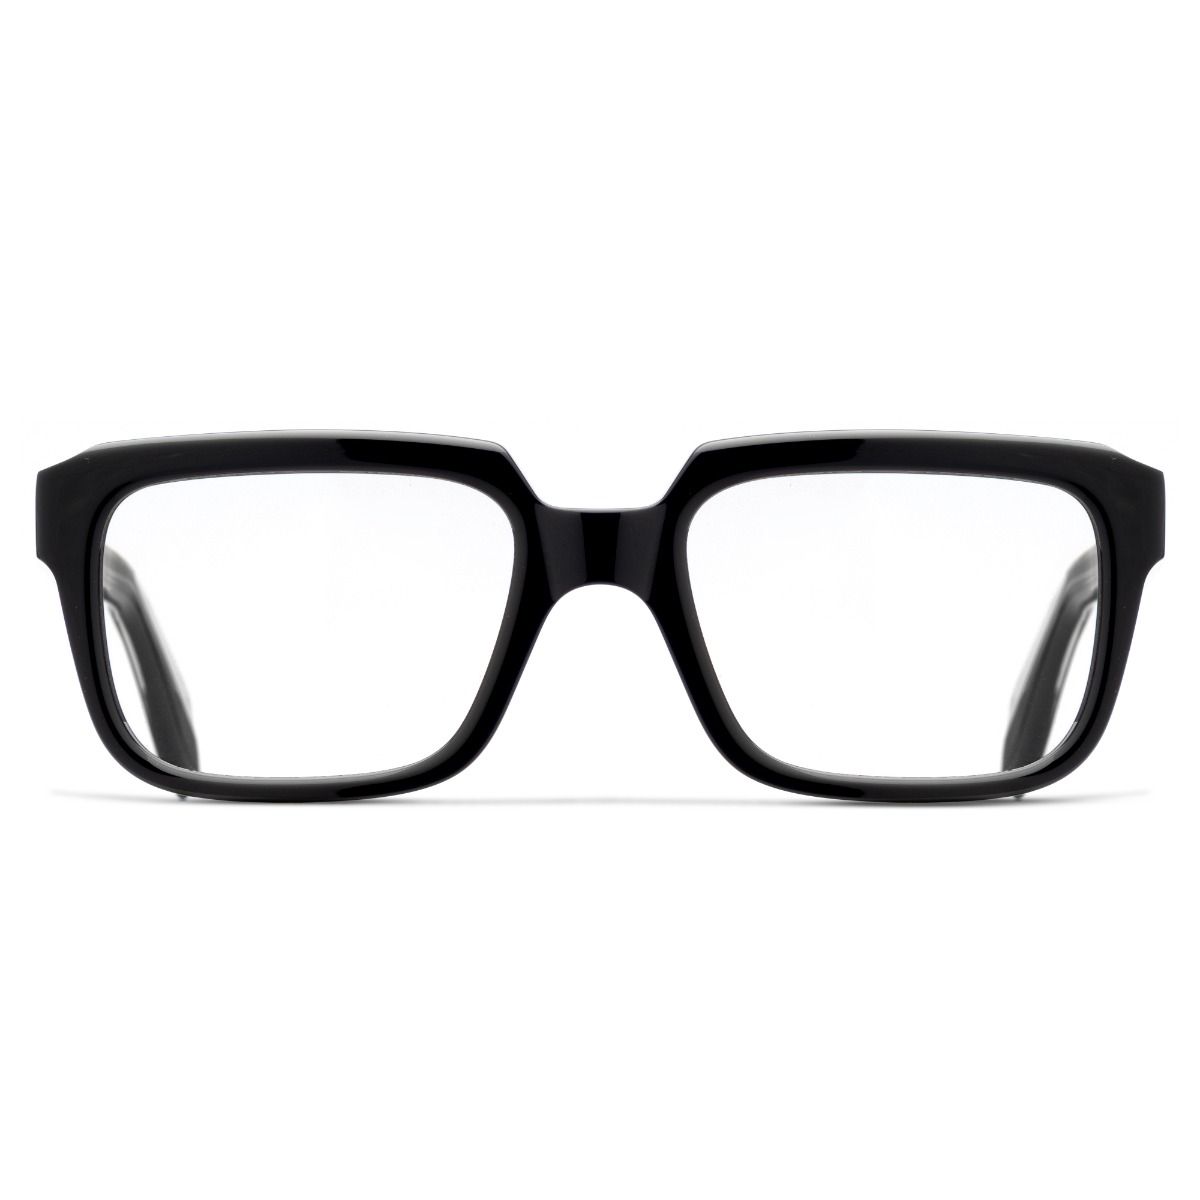 9289 Optical Rectangle Glasses - Black by Cutler and Gross